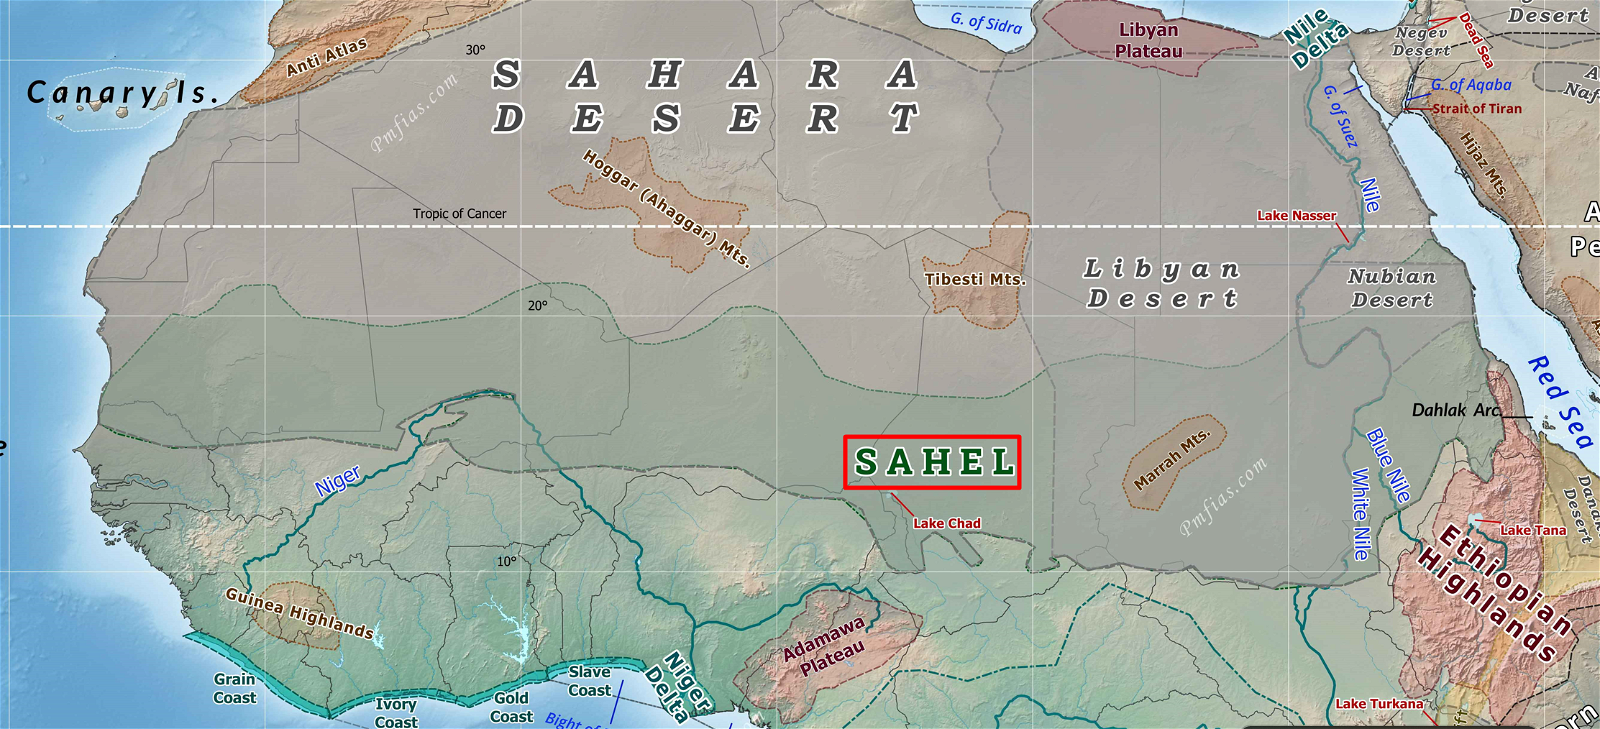 A map of the sahara desert
Description automatically generated